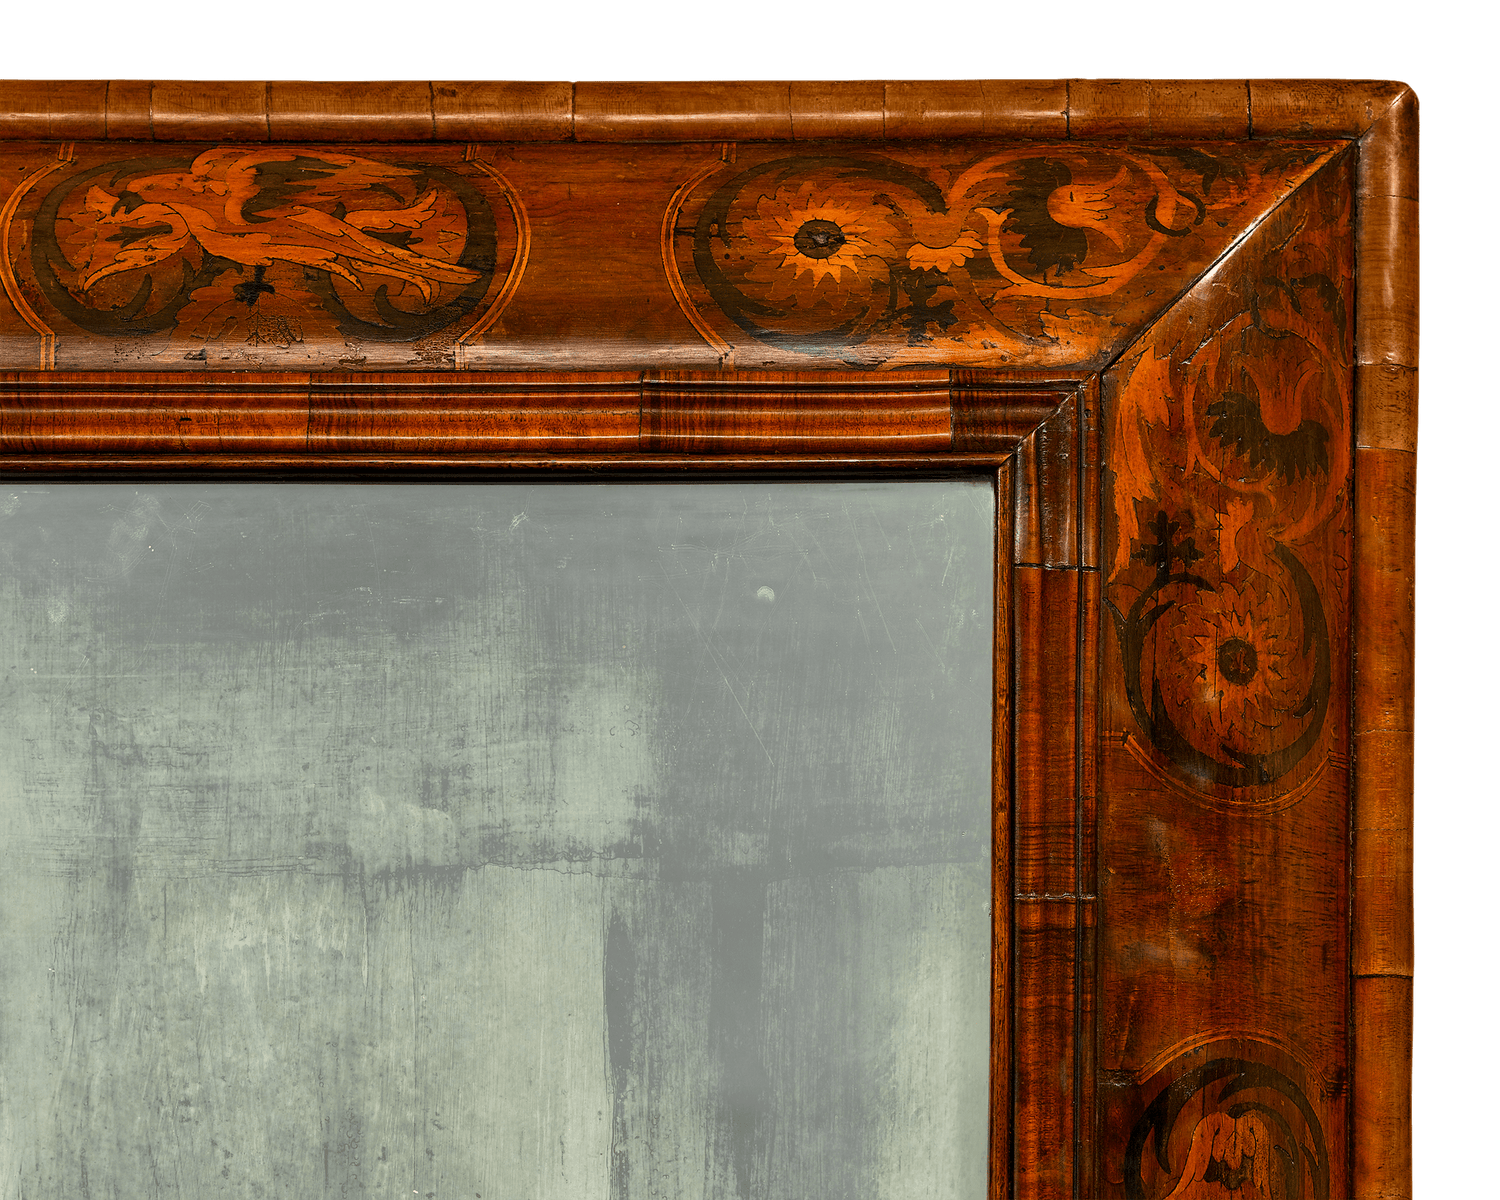 Incredible period marquetry surrounds this rare, all-original mirror